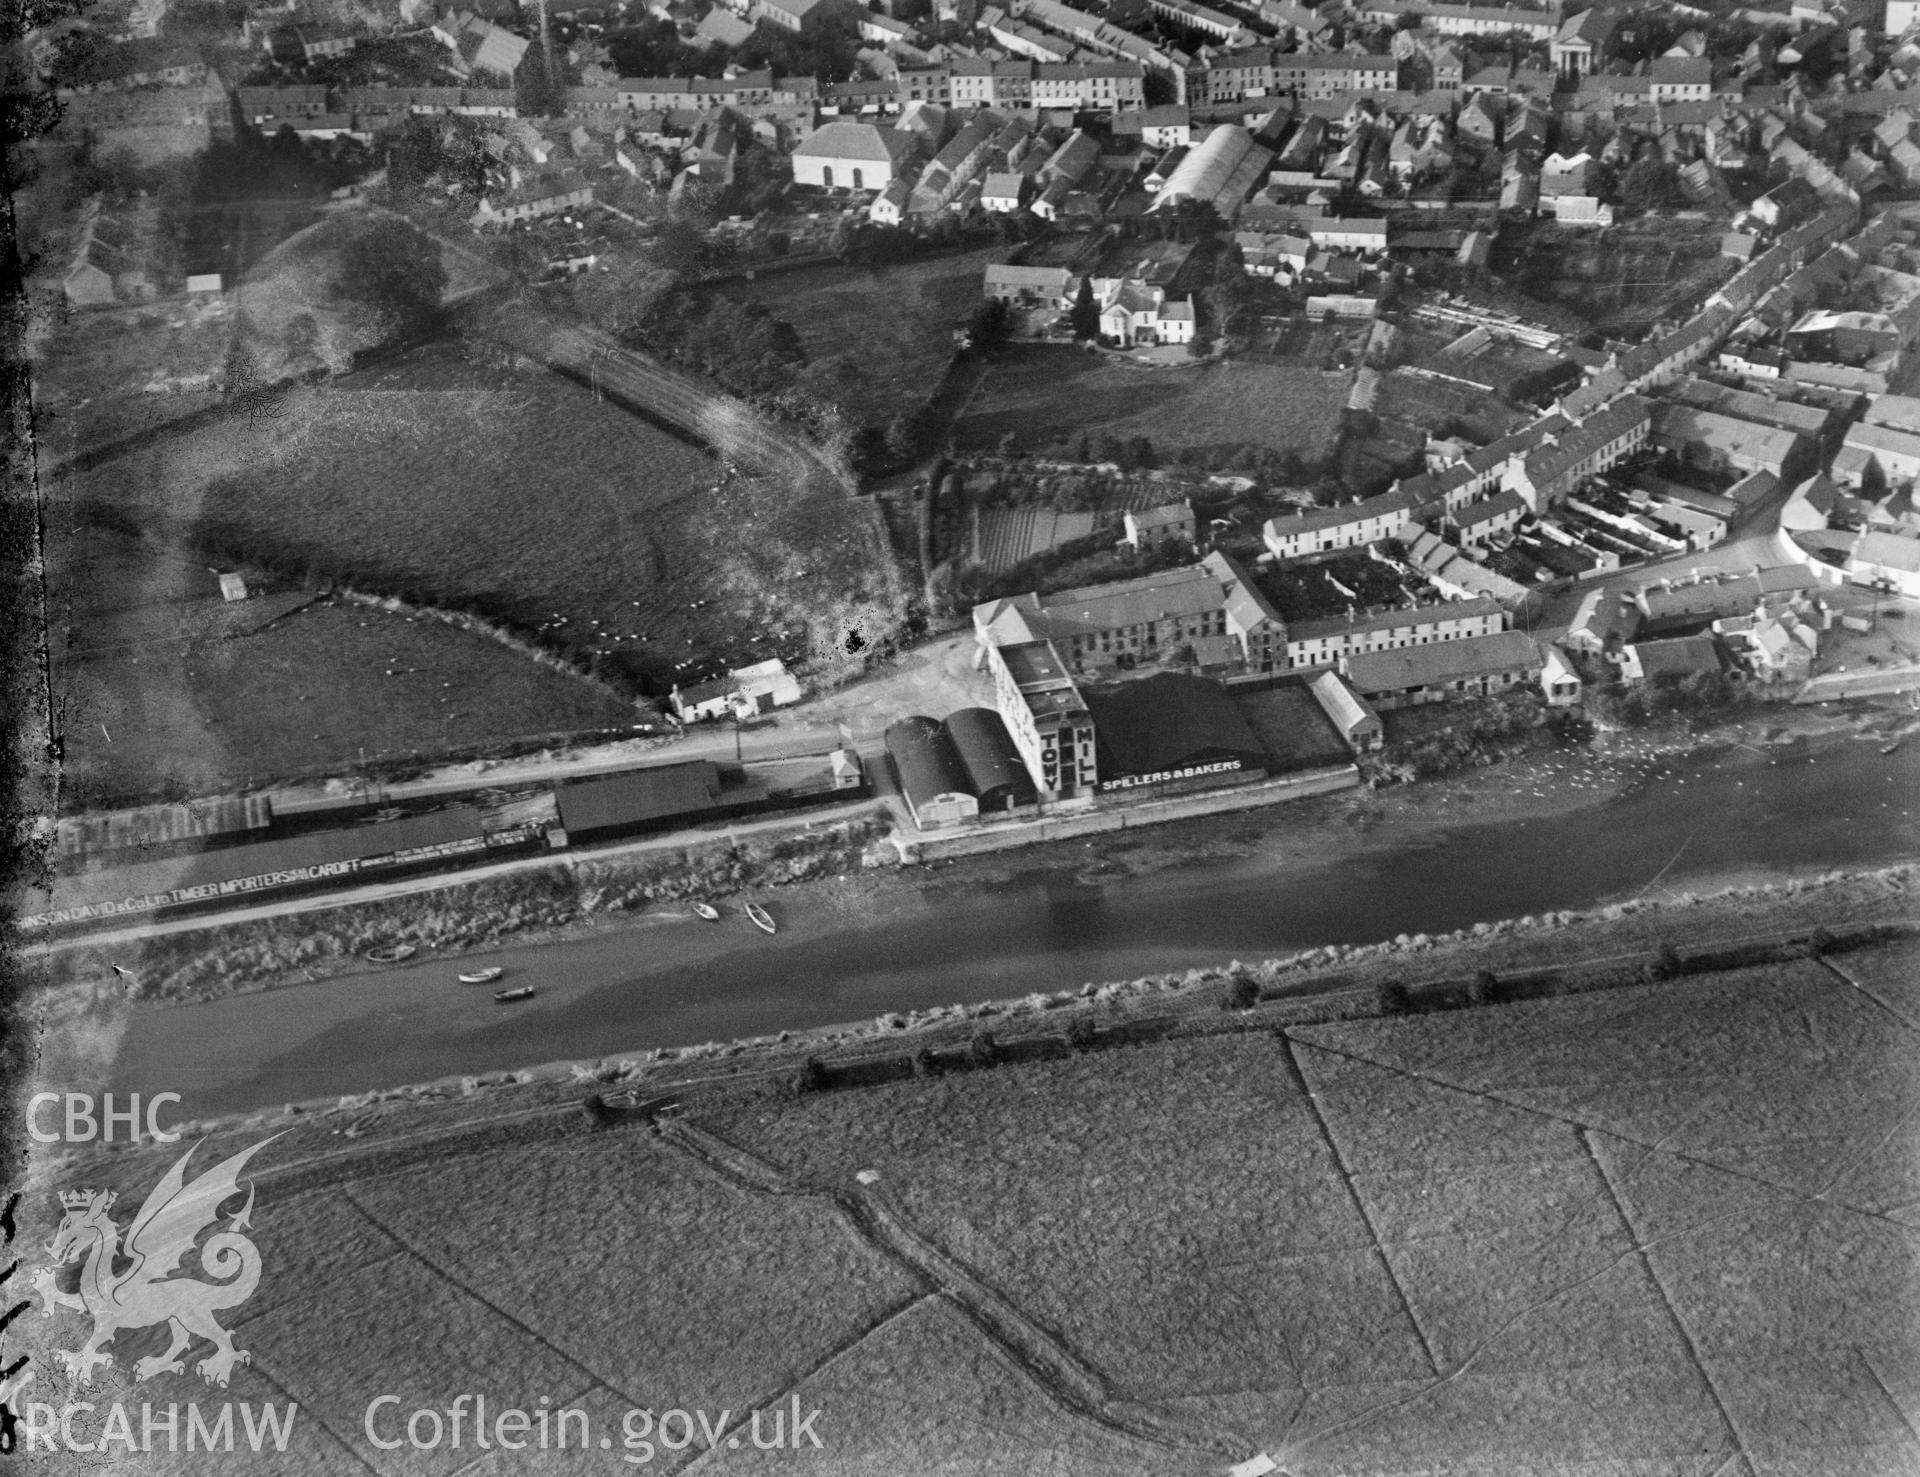 View of Carmarthen showing river and Towy Mill, oblique aerial view. 5?x4? black and white glass plate negative.